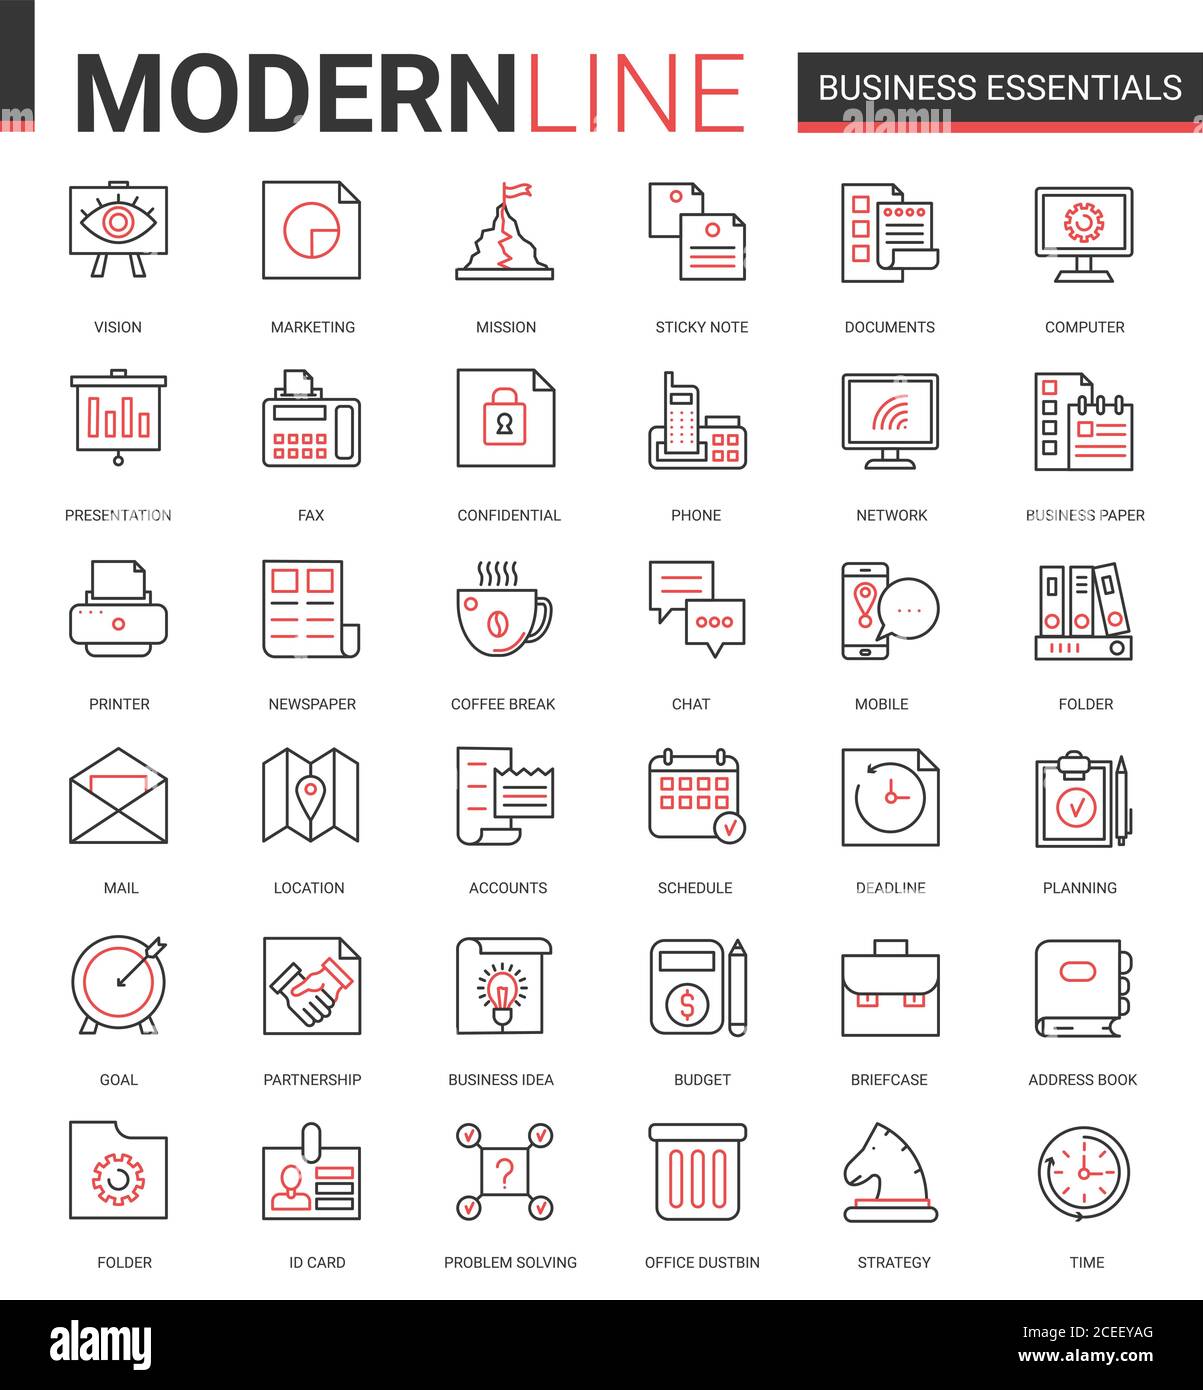 Business thin red black line icon vector illustration set. Business essential website outline pictogram symbols collection with office objects, equipment and documents for financial development Stock Vector